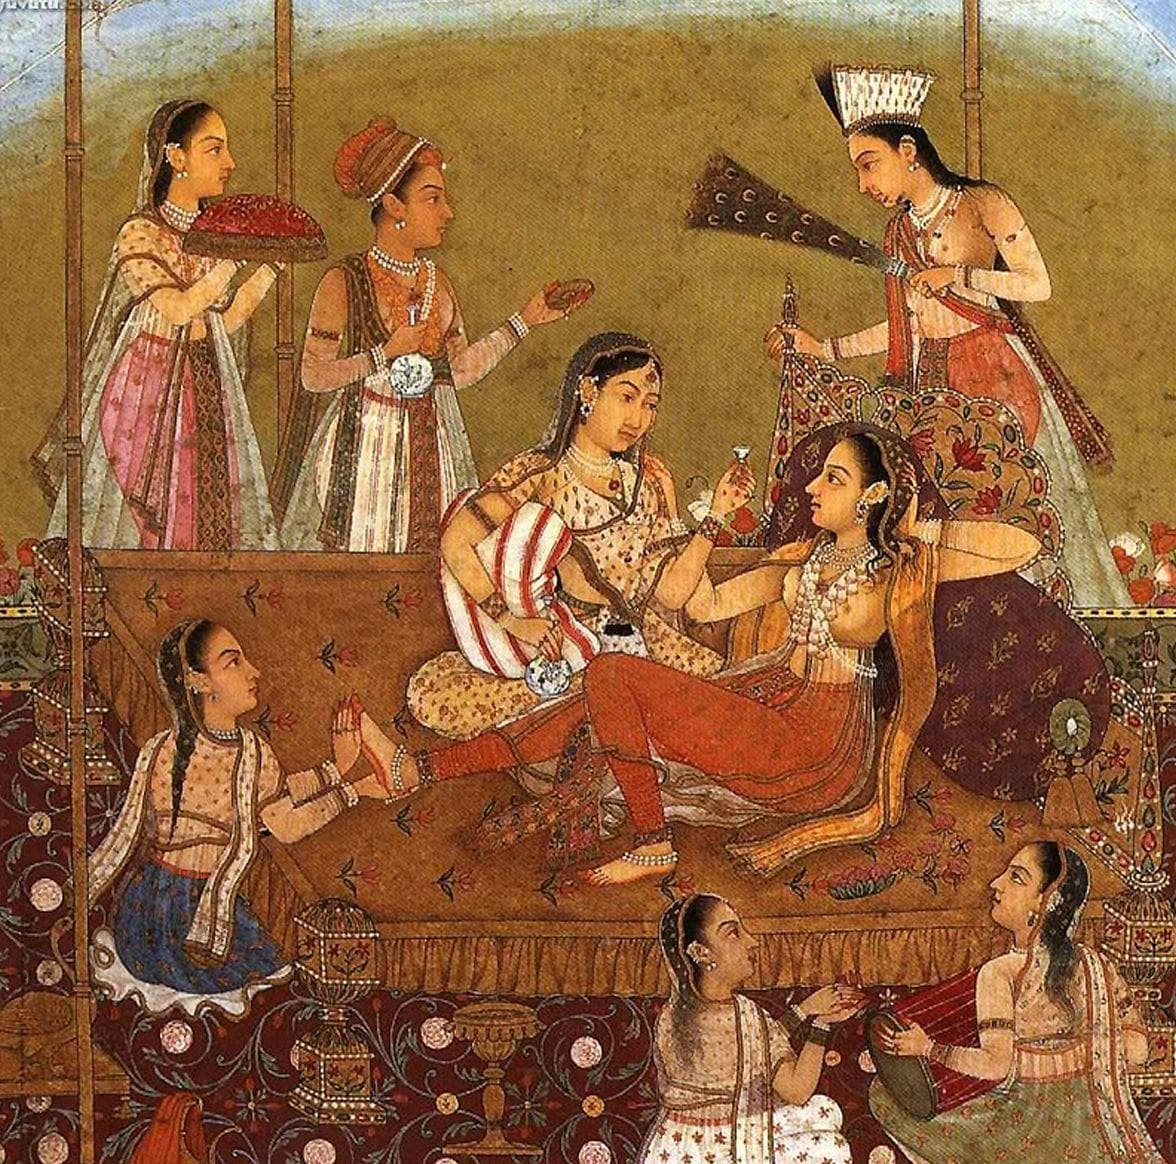 Ancient Indian Group Sex - What Sex Was Like In Ancient India